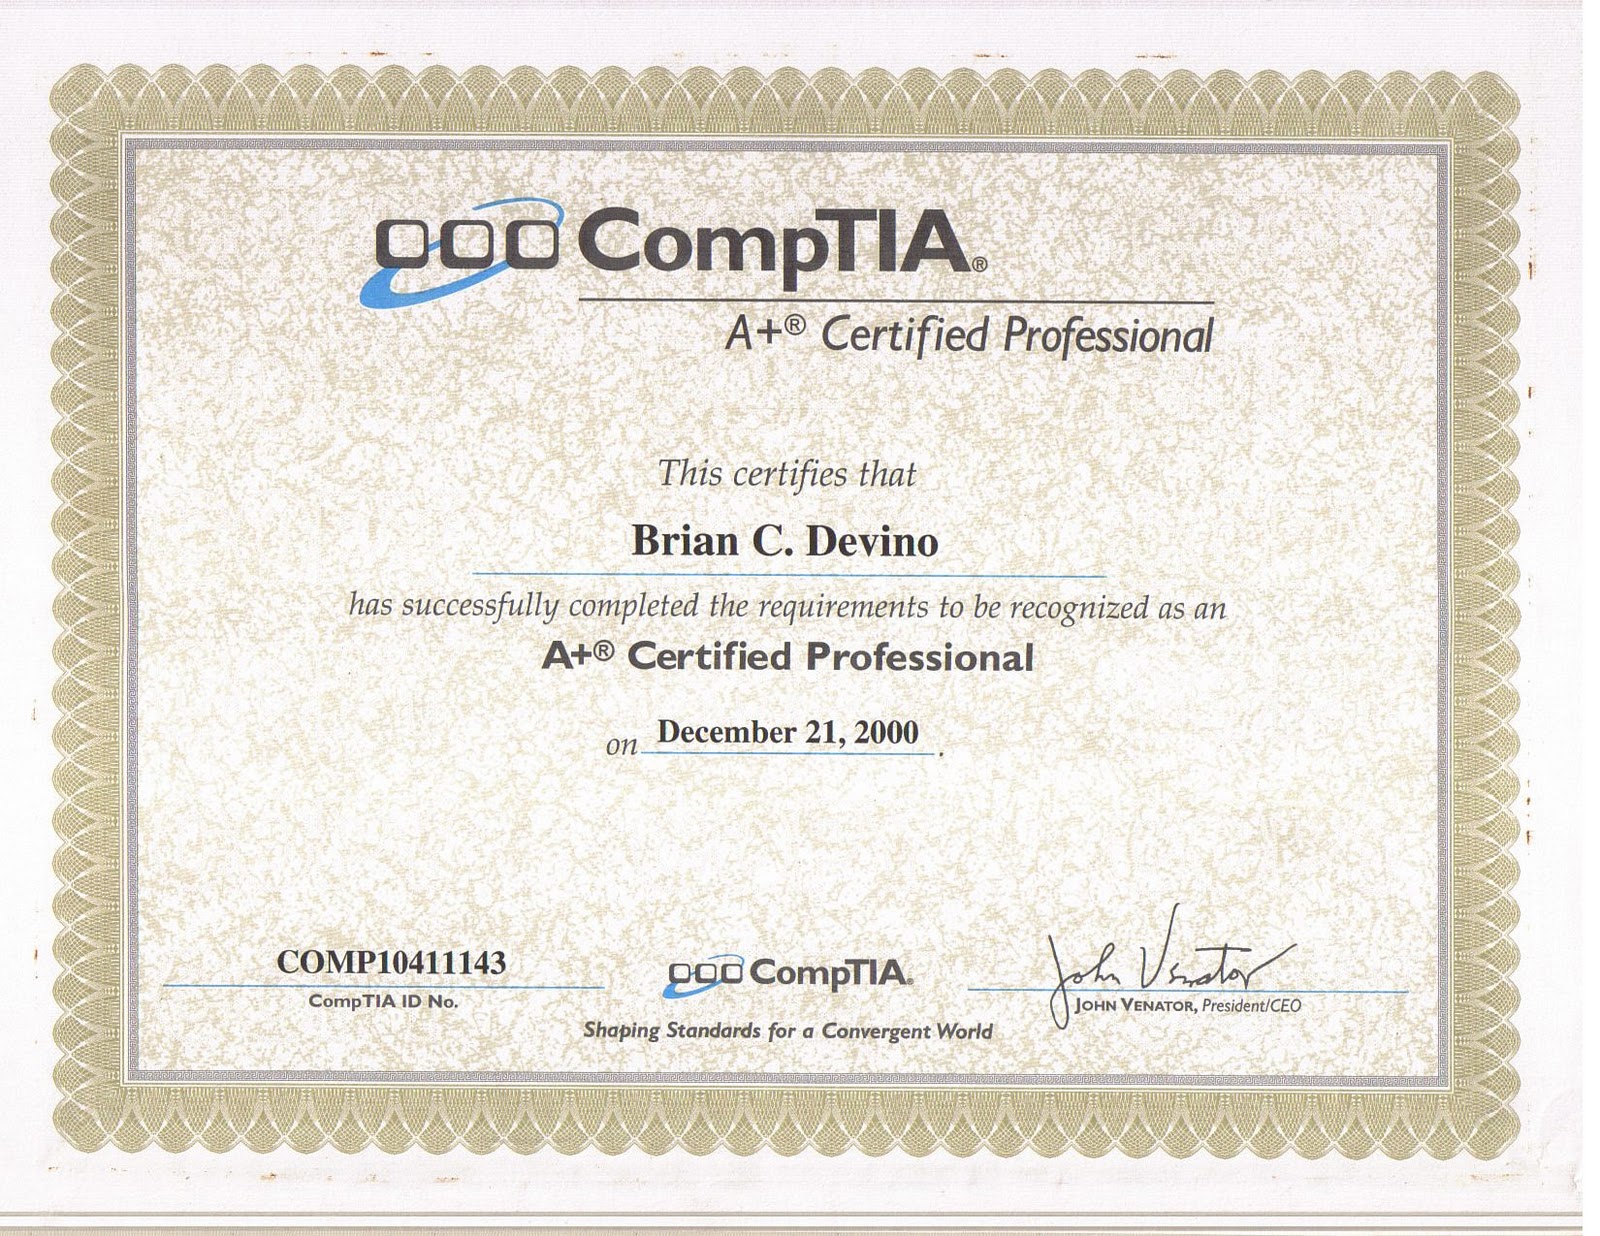 How to Get Online Diploma for CompTIA A+